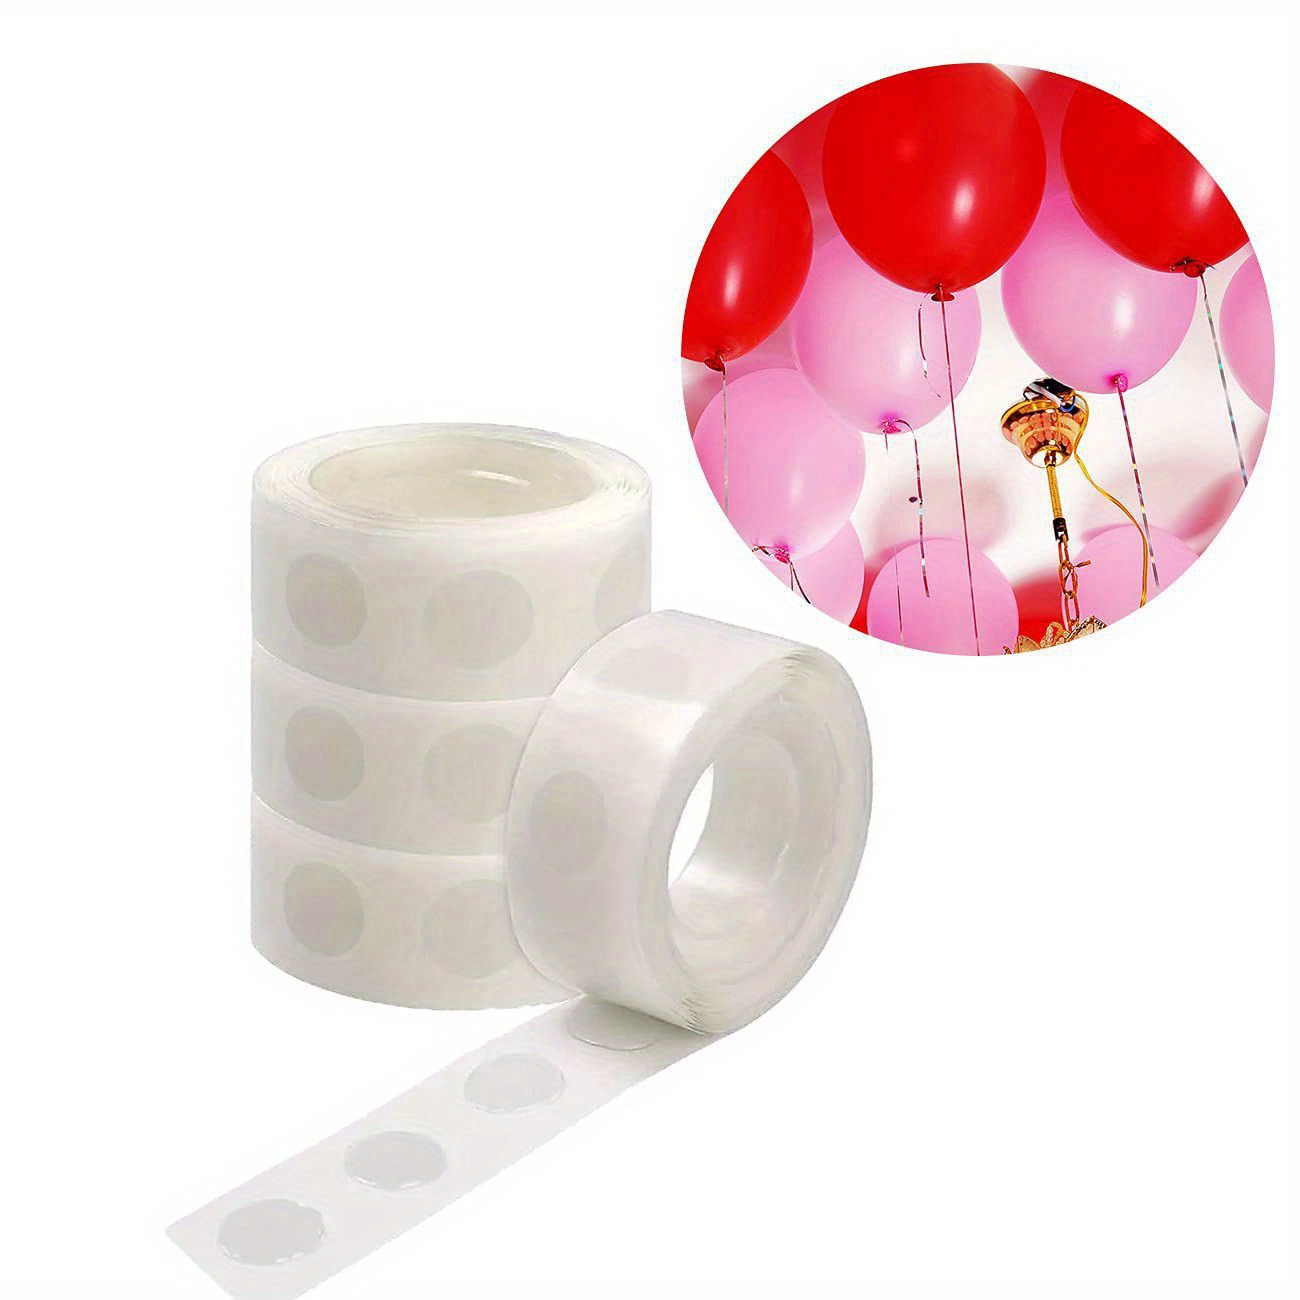 200pcs Transparent Dot Double-sided Adhesive Tape (100pcs Round Dot/Roll)  Adhesive Tape For Scrapbook Crafts Journal